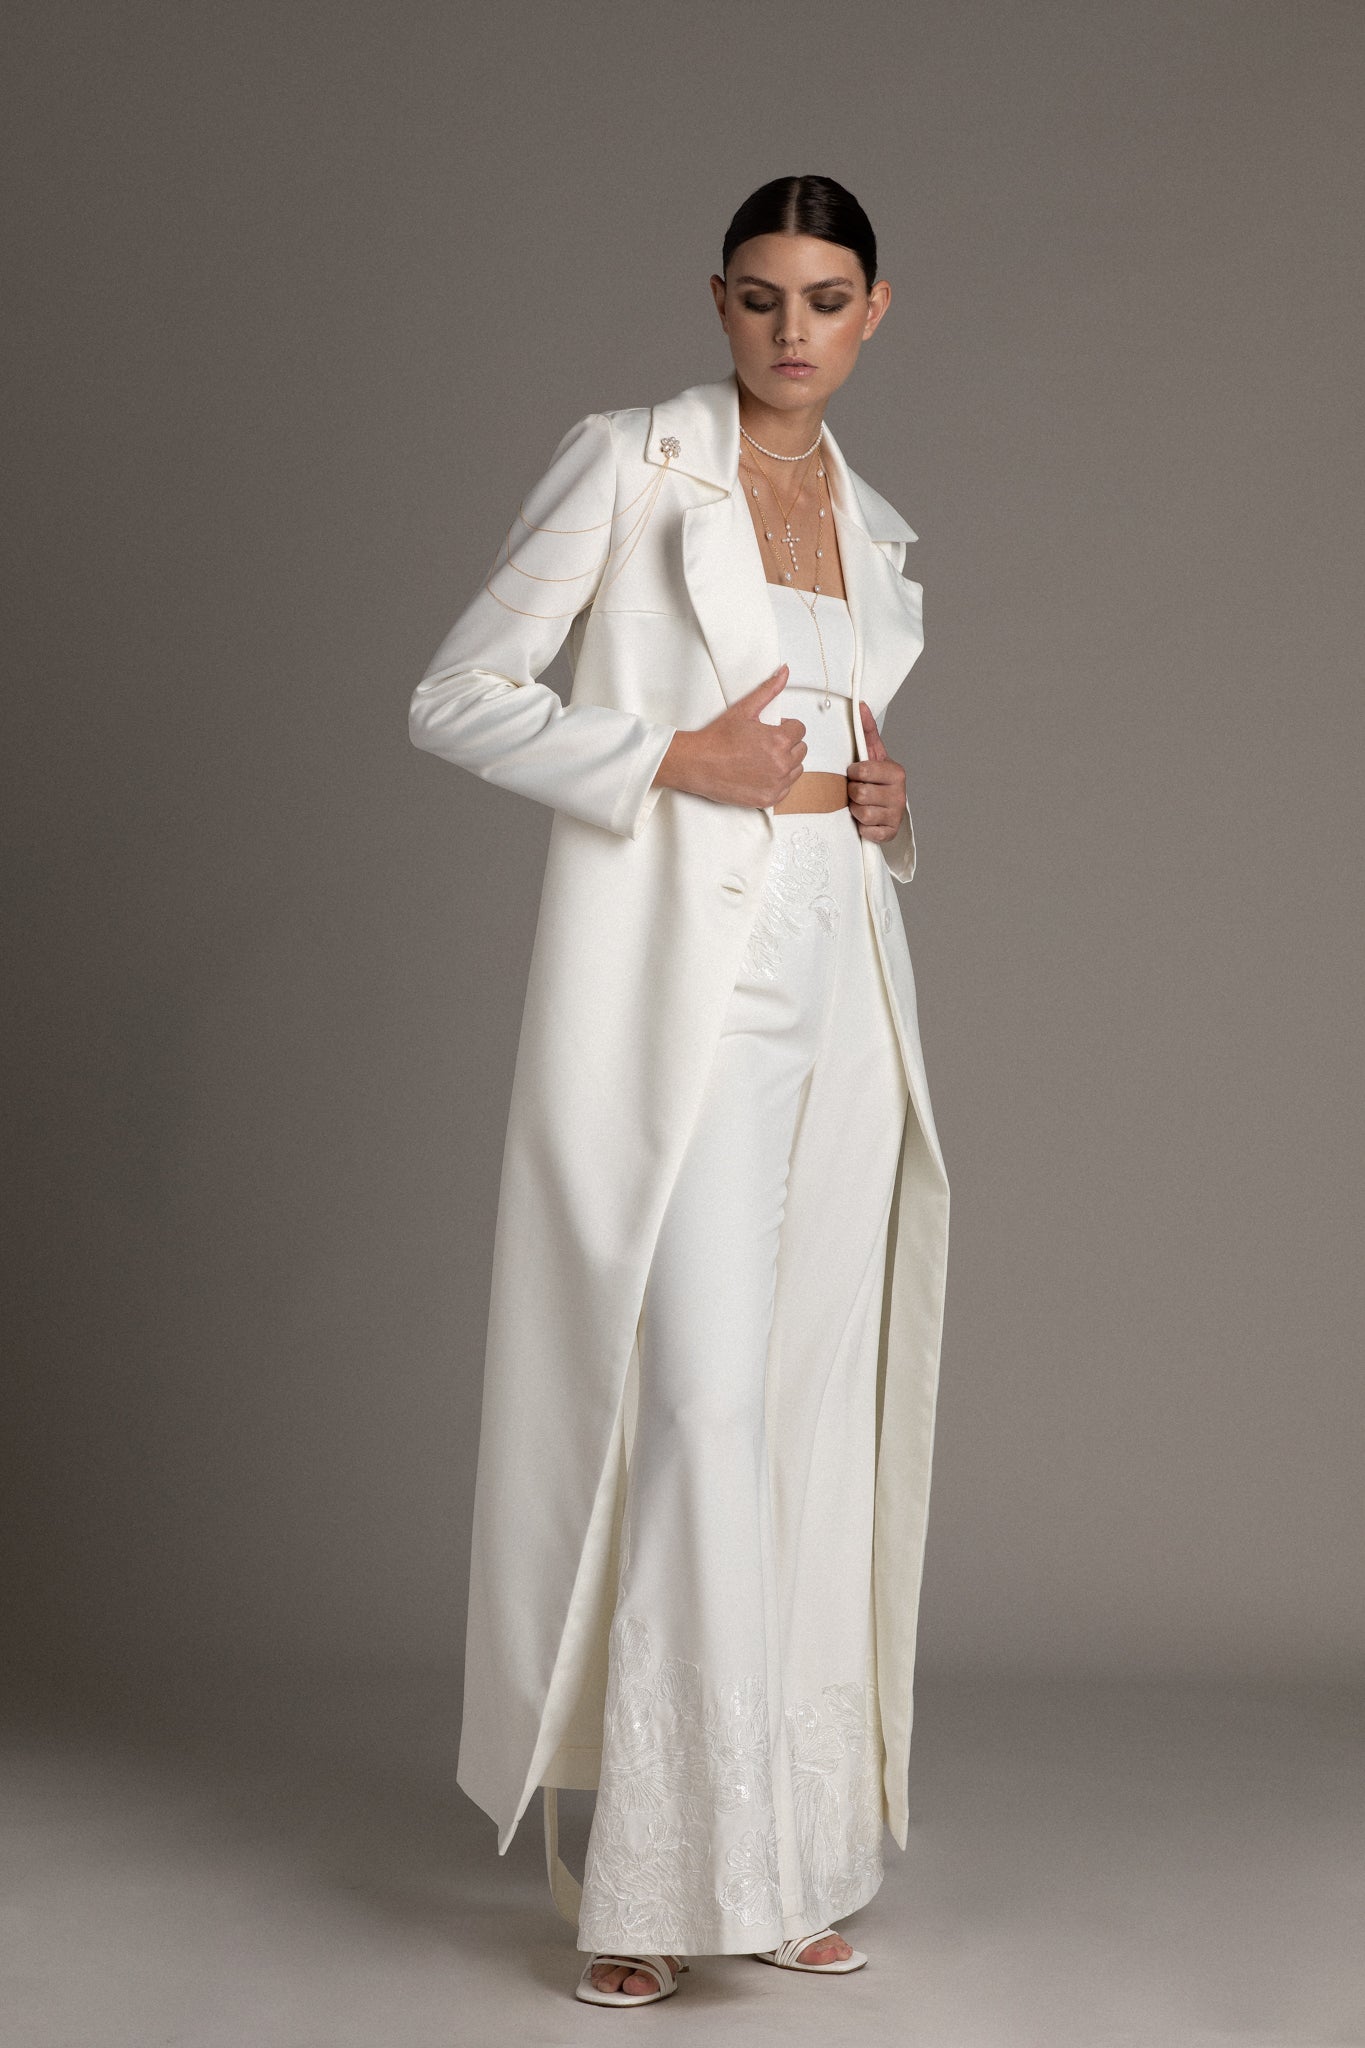 The mother-of-pearl buttons and substantial belt are perfectly complemented by the opulent Duchess Satin. Designed with a relaxed fit, it's tailored for the cool and confident bride.